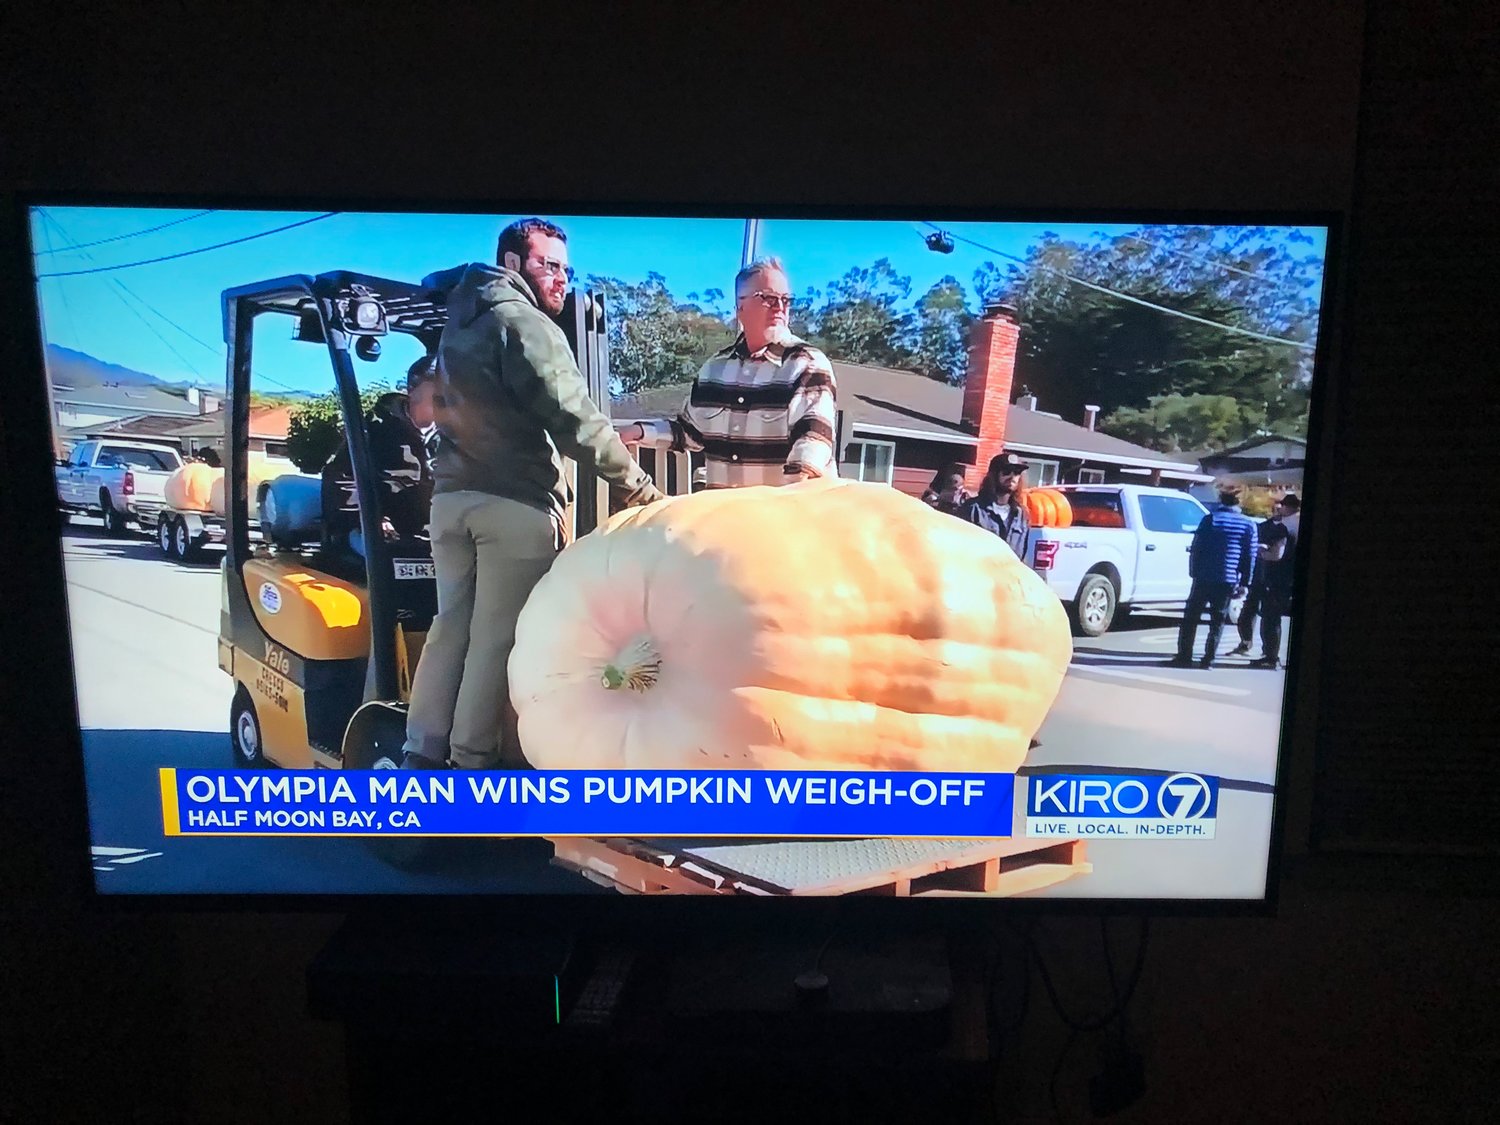 Jeff Uhlmeyer's giant pumpkin is escorted to the weighing platform, as shown on KIRO7 News on Oct. 12, 2021.